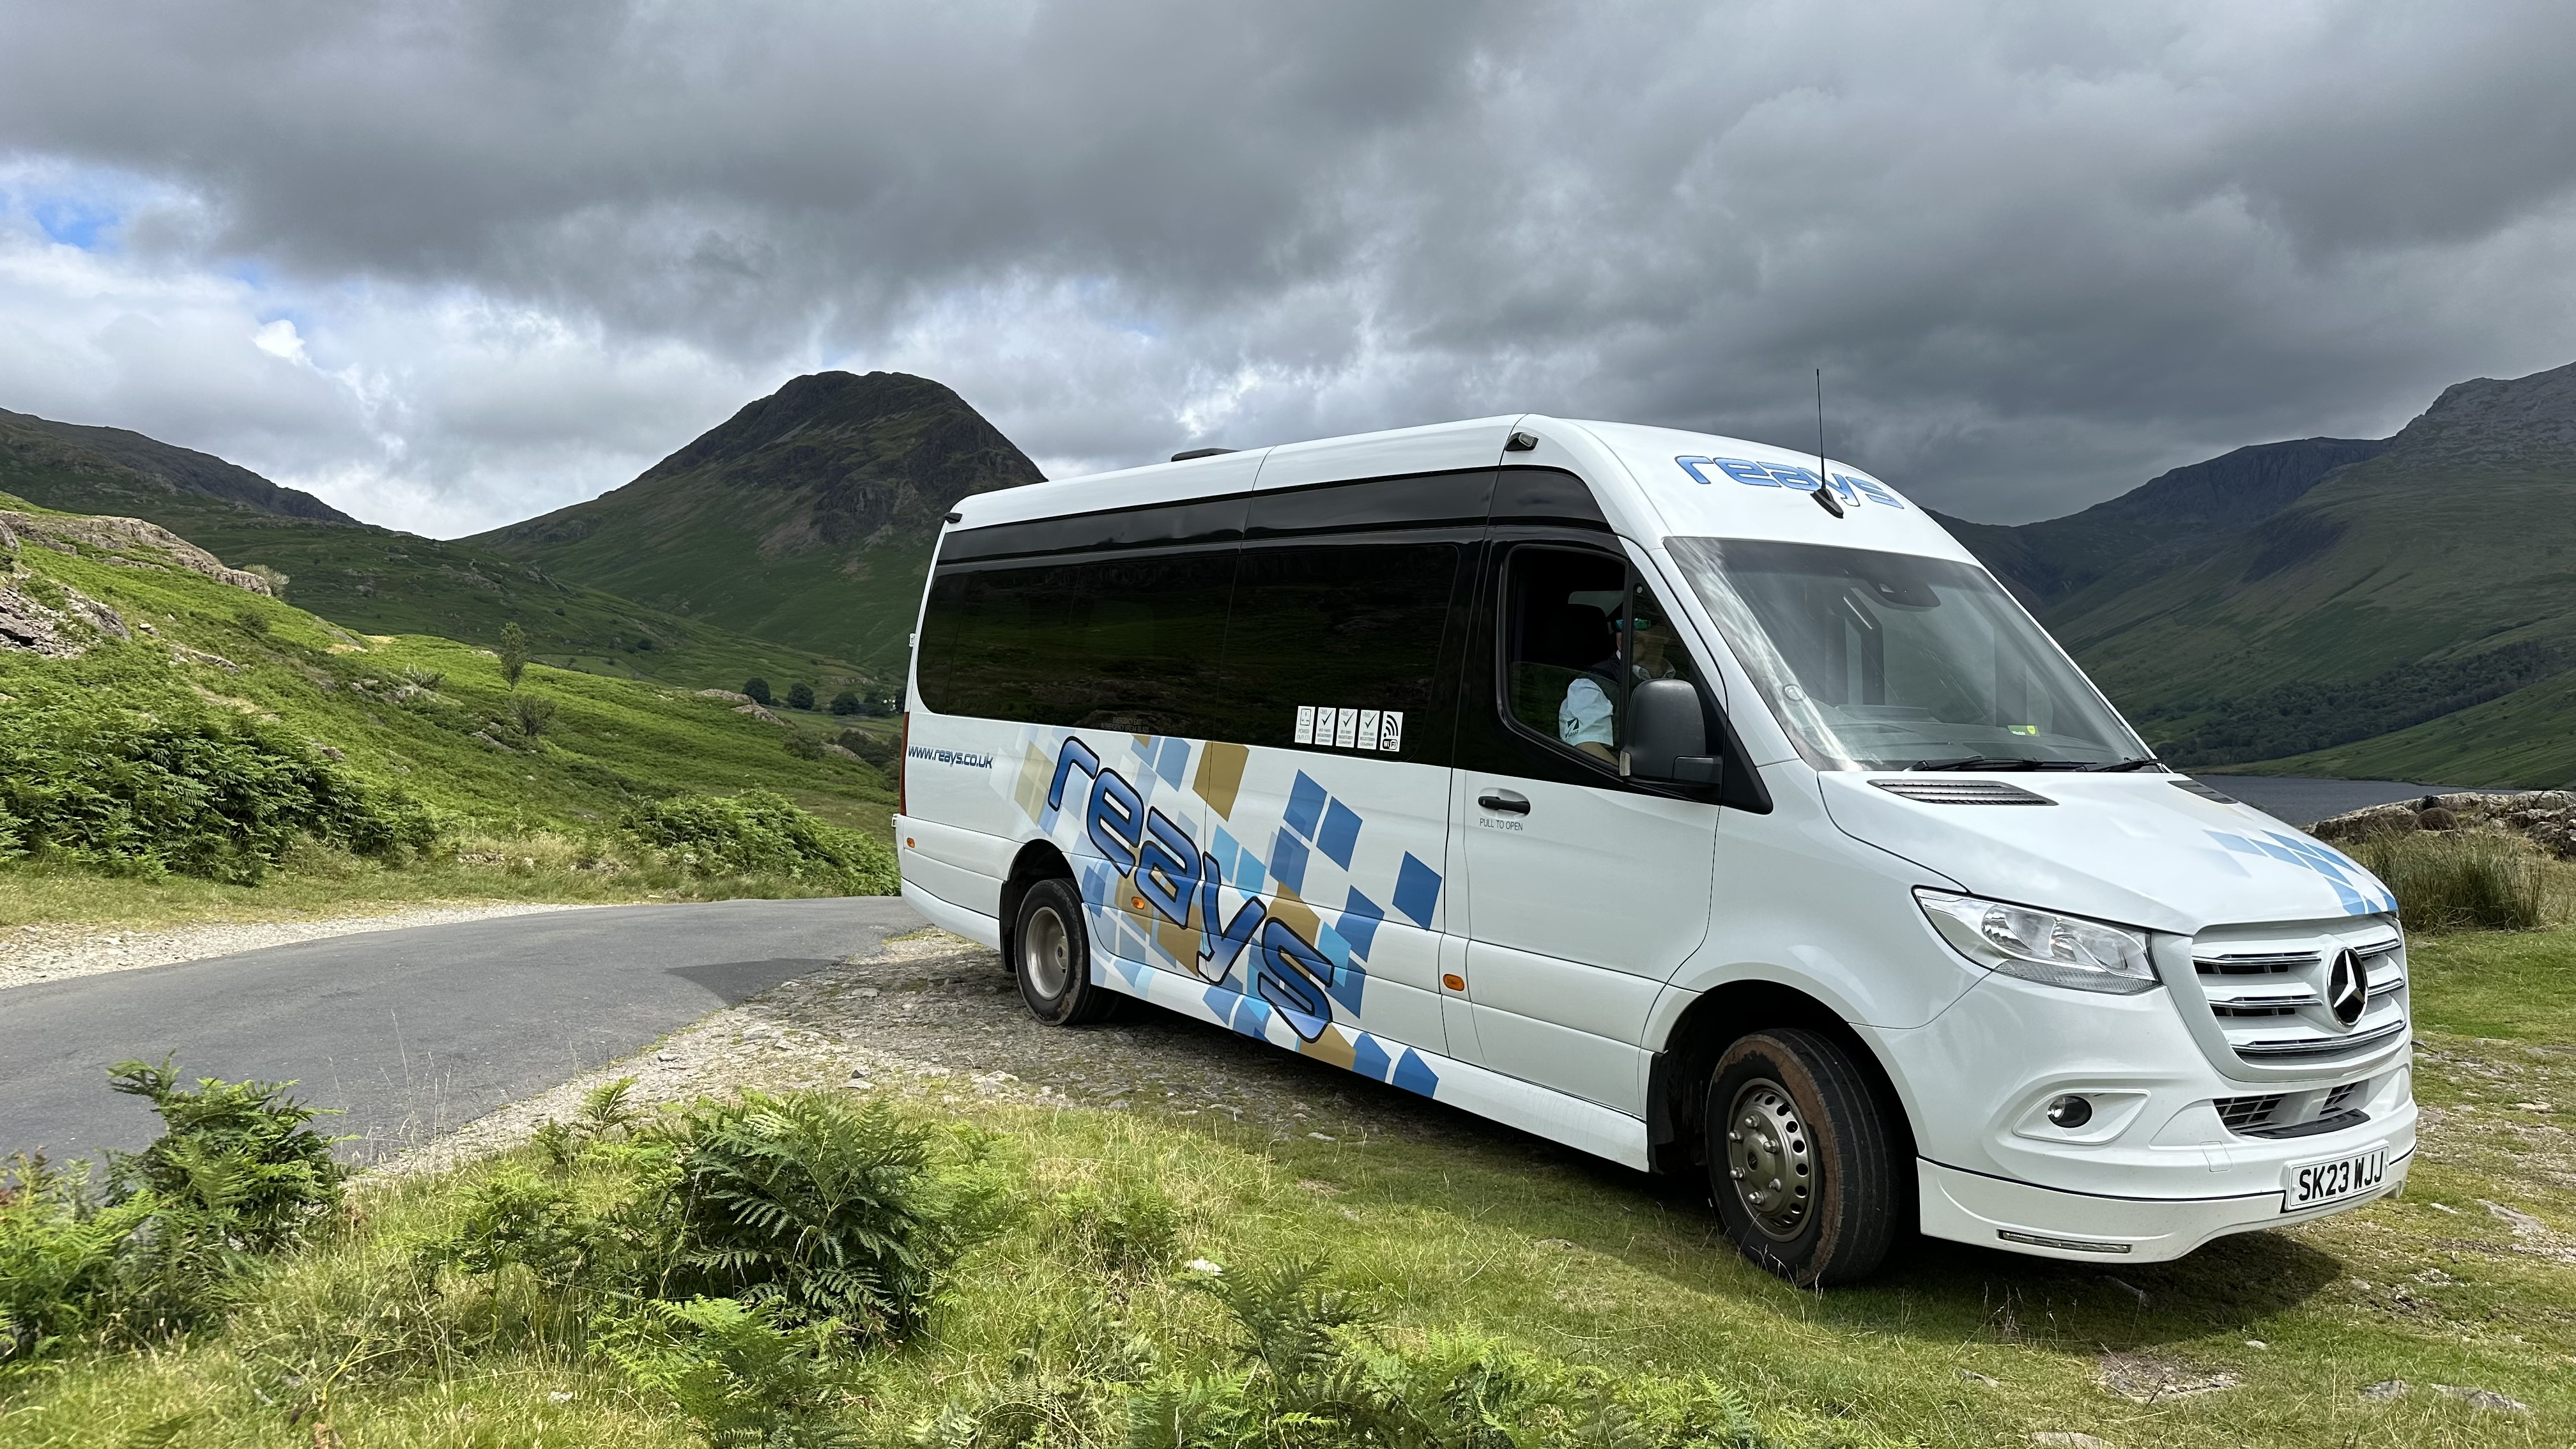 Wasdale shuttlebus parked up with mountains in background